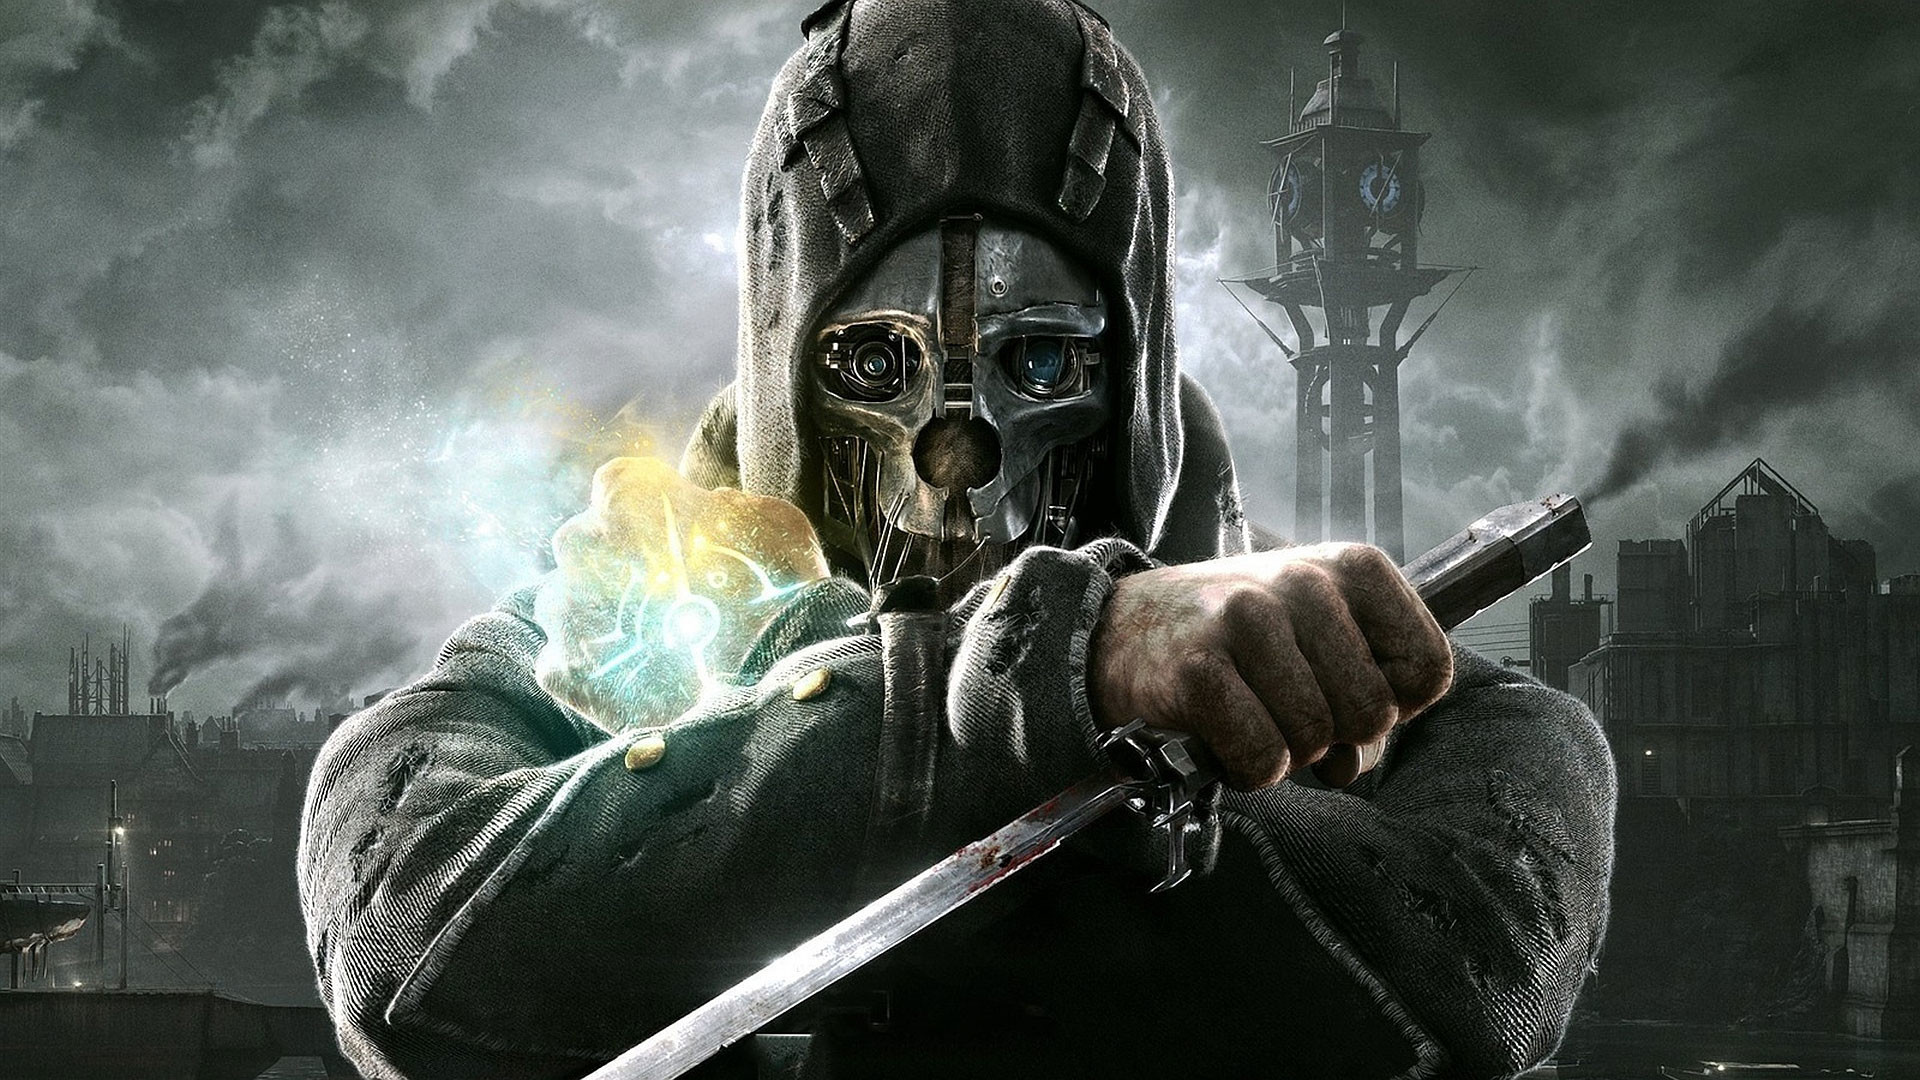 1920x1080 Dishonored 2 4K Wallpaper | Dishonored 2 1080p Wallpaper ...